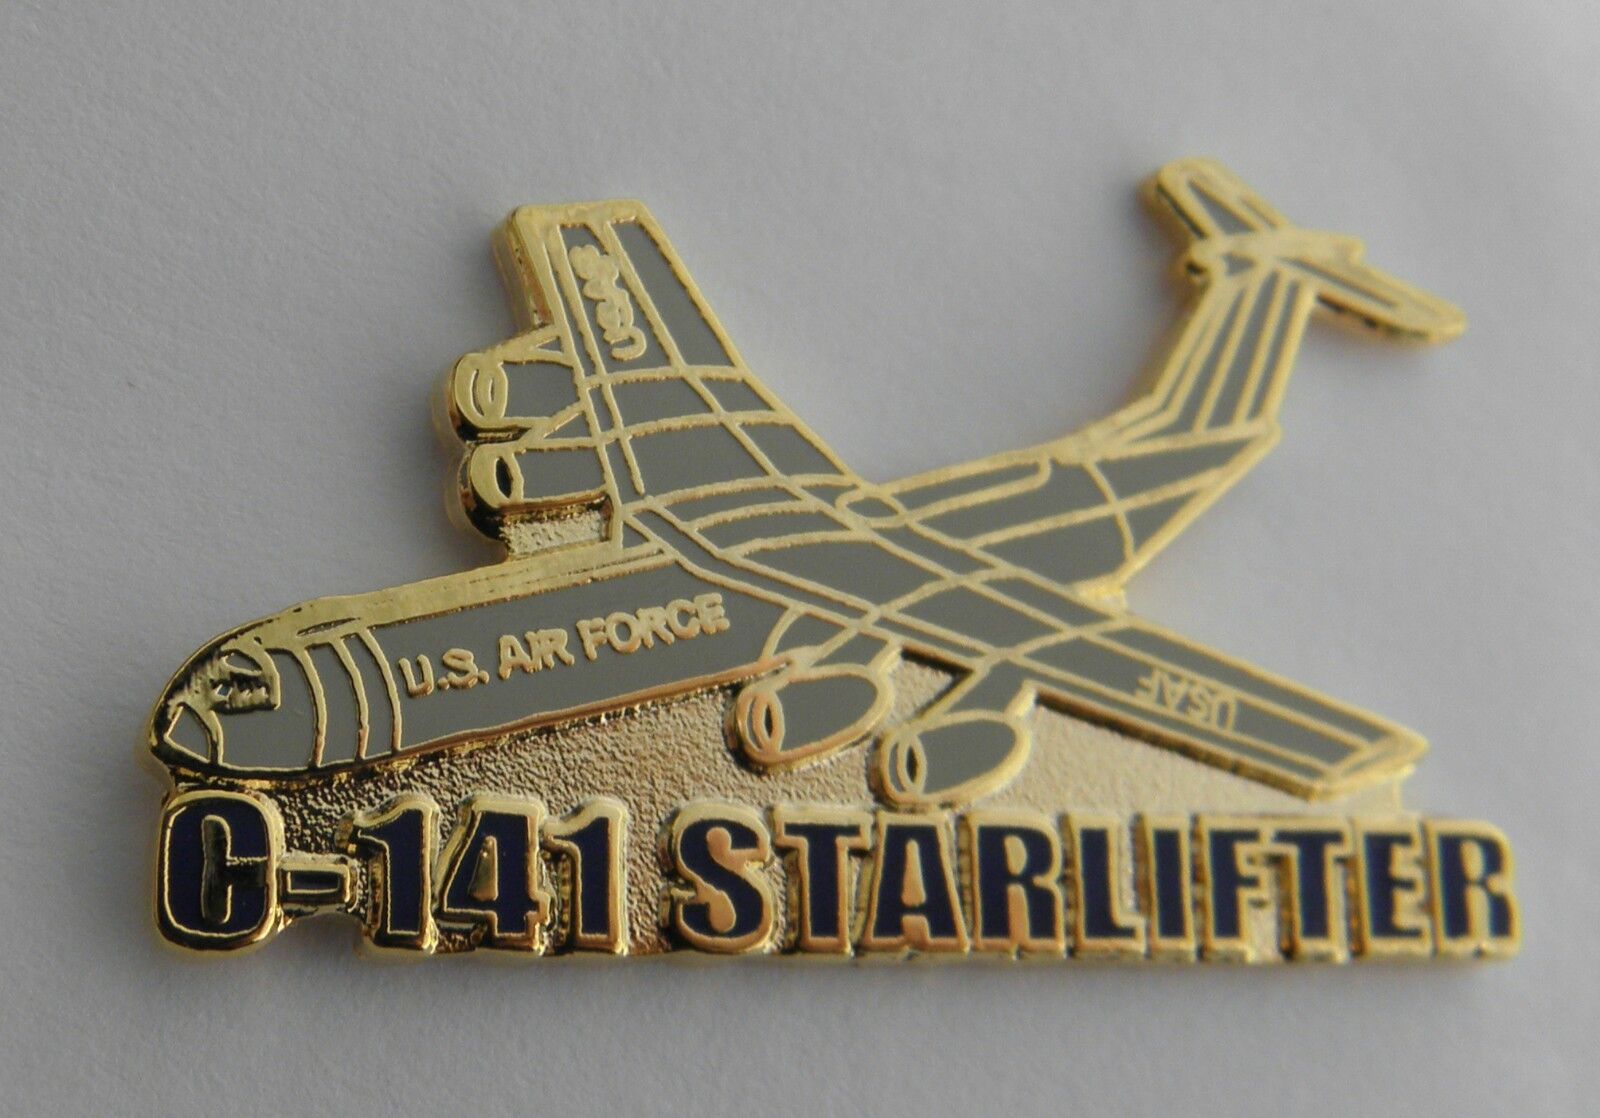 STARLIFTER C-141 TRANSPORT AIRCRAFT LAPEL PIN BADGE 1.5 INCHES